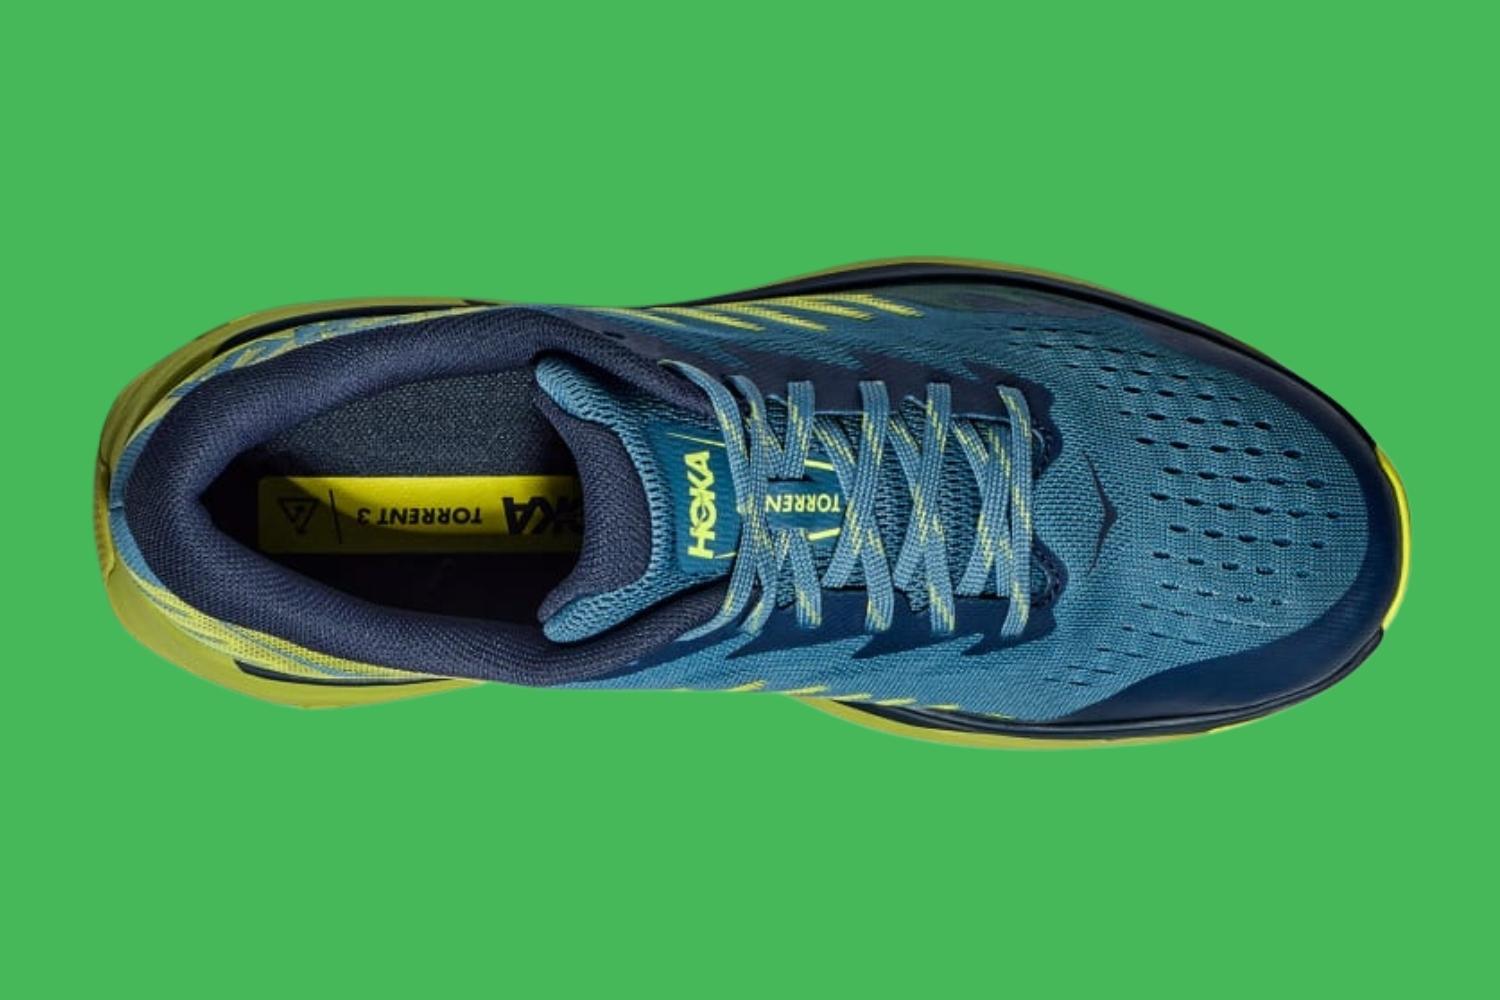 Hoka Torrent 3 Review (2023): The Best for Speed Trail Running?